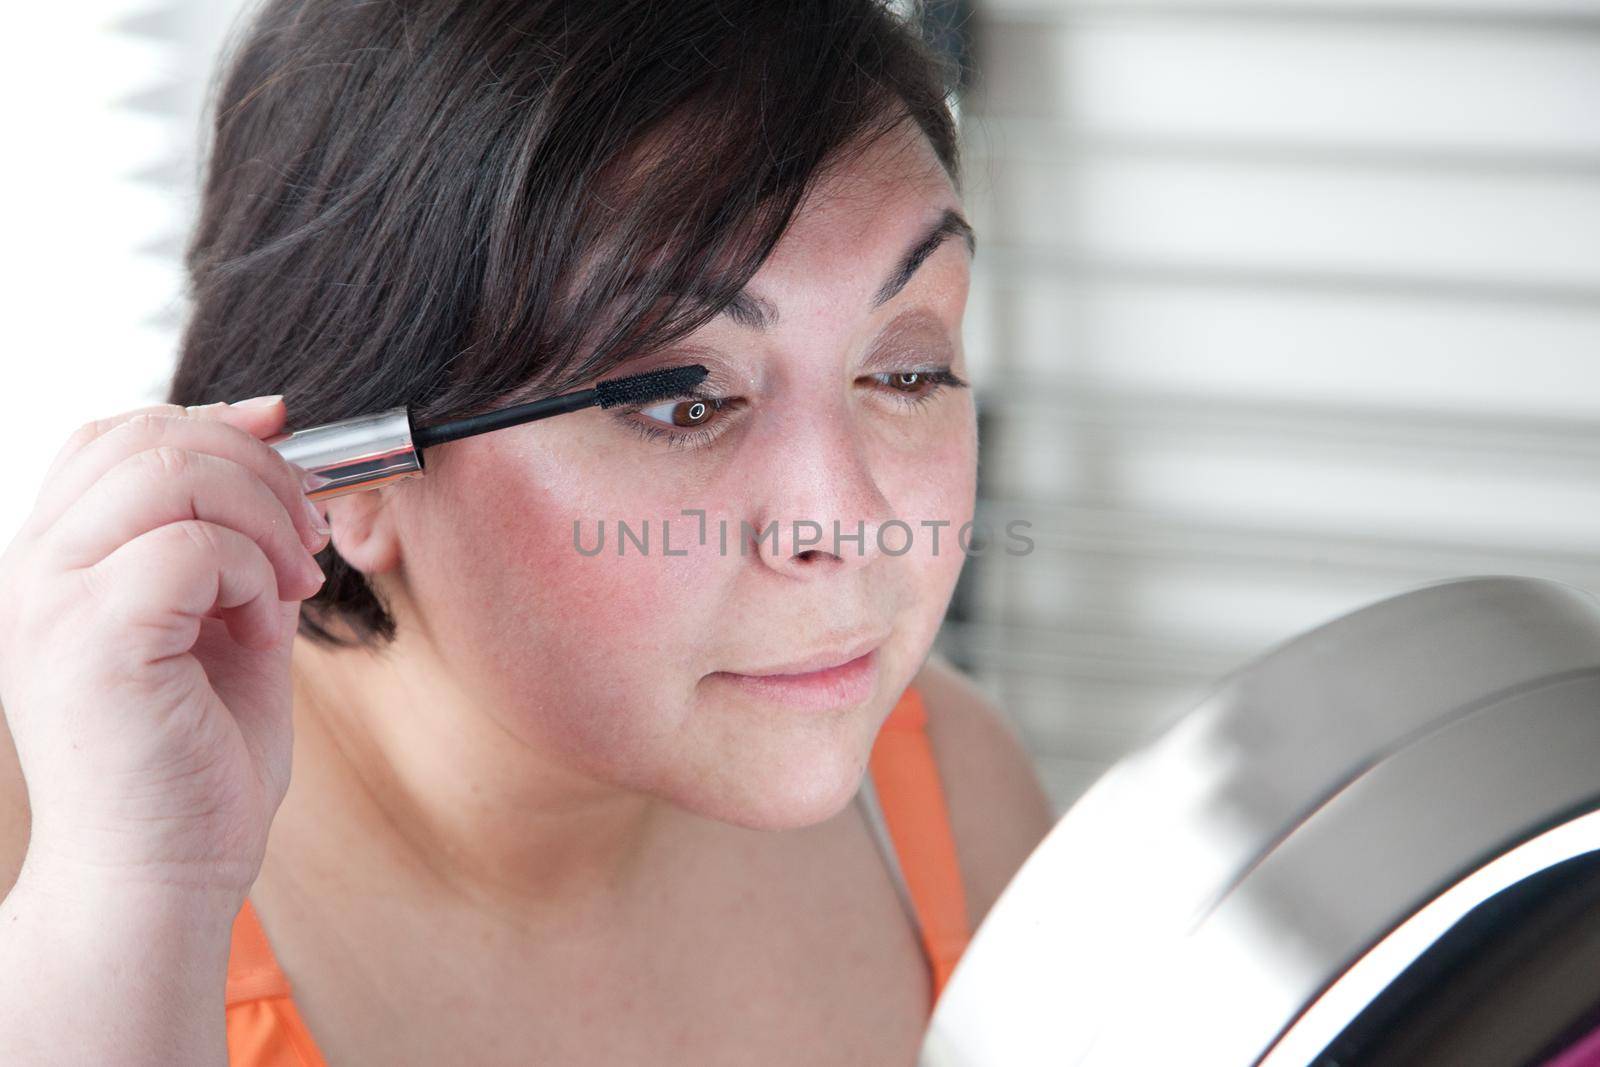 Woman in front of mirror puts holds a mascara wand and applies eye makeup 